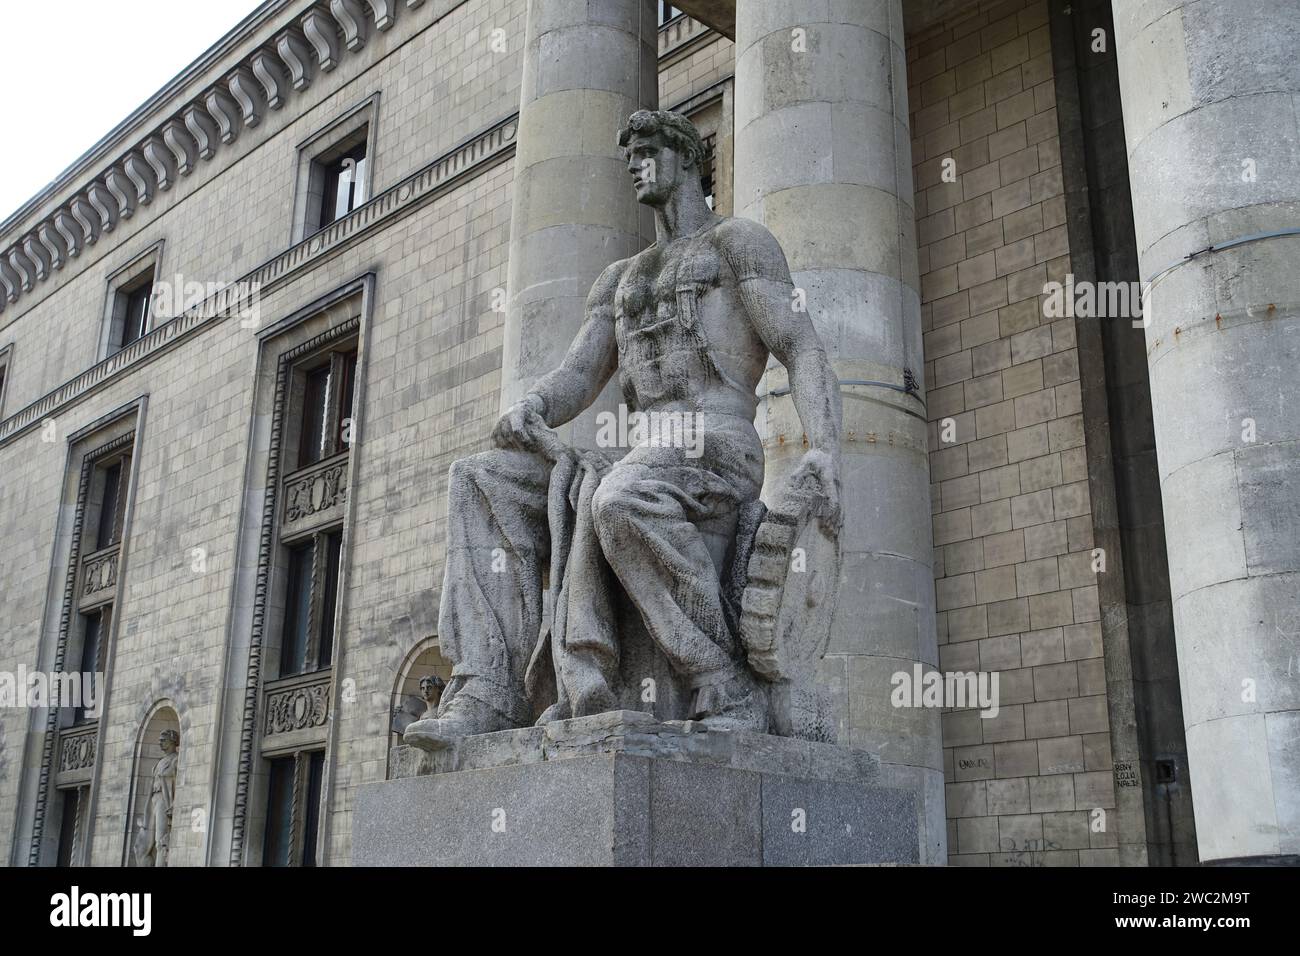 Statue of a worker at the Palace of Culture, communist monument in Warsaw Stock Photo